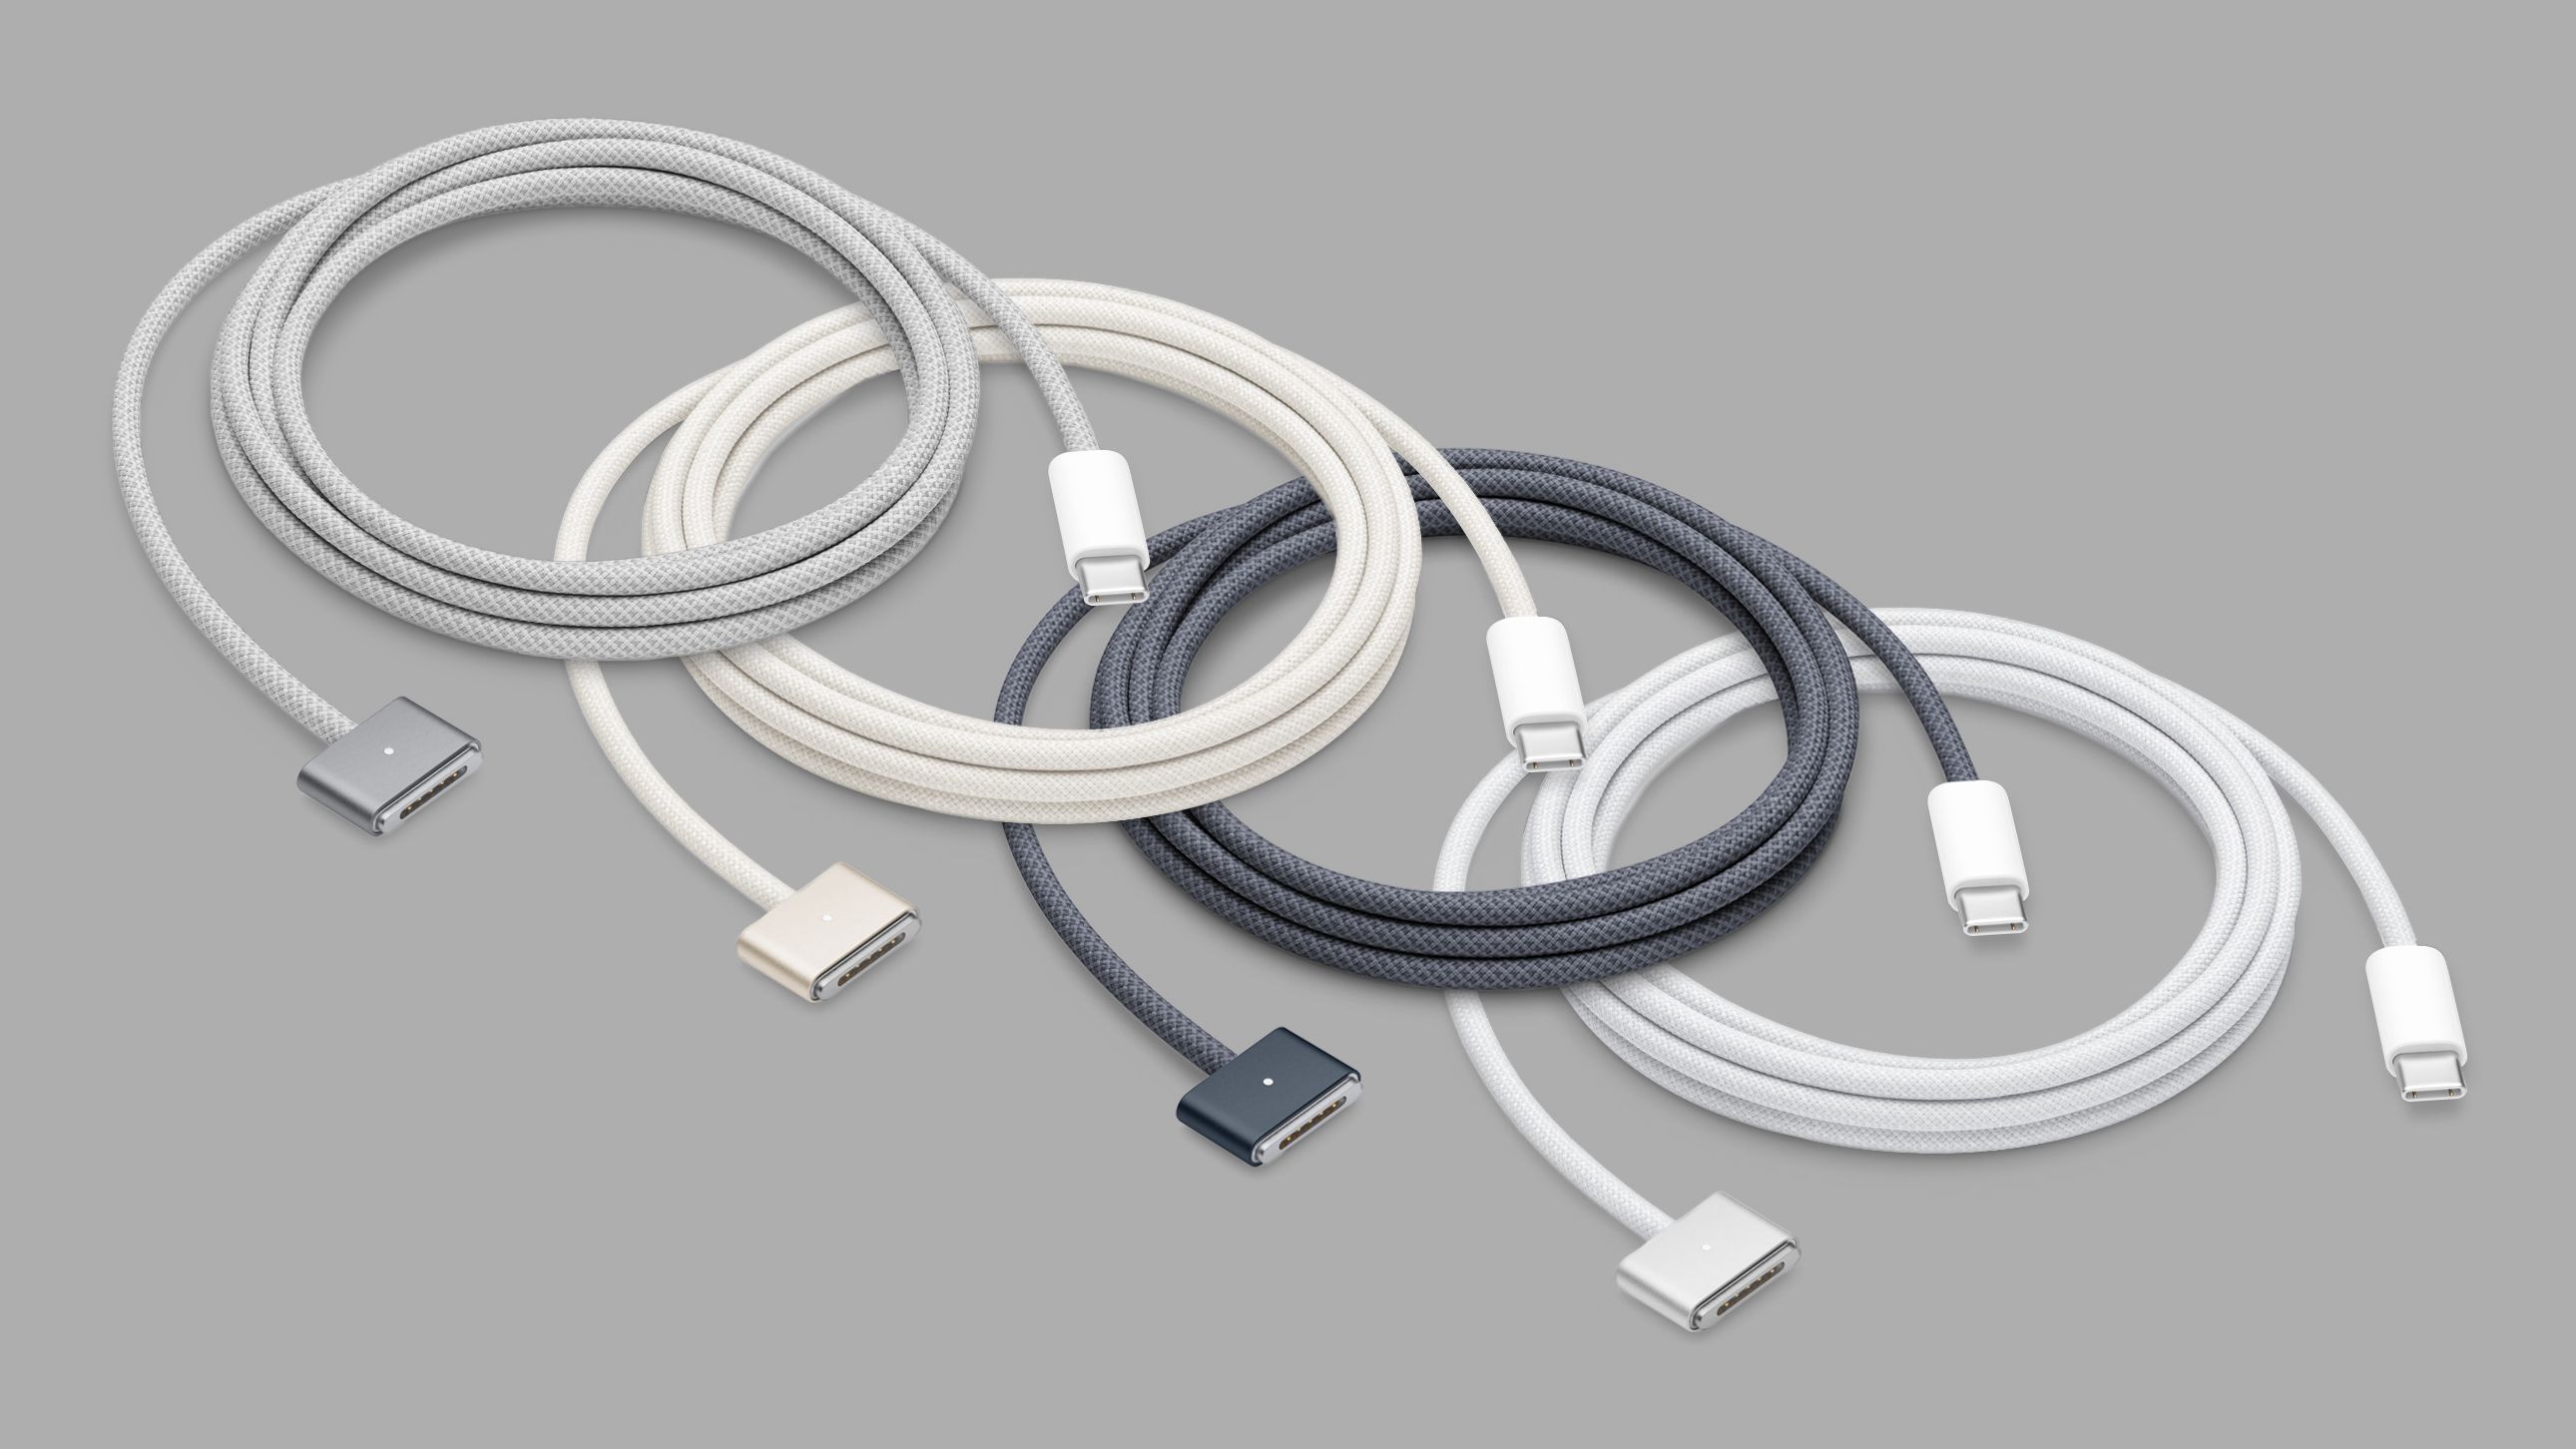 magsafe-3-charging-cable-now-available-in-new-colors-matching-macbook-air